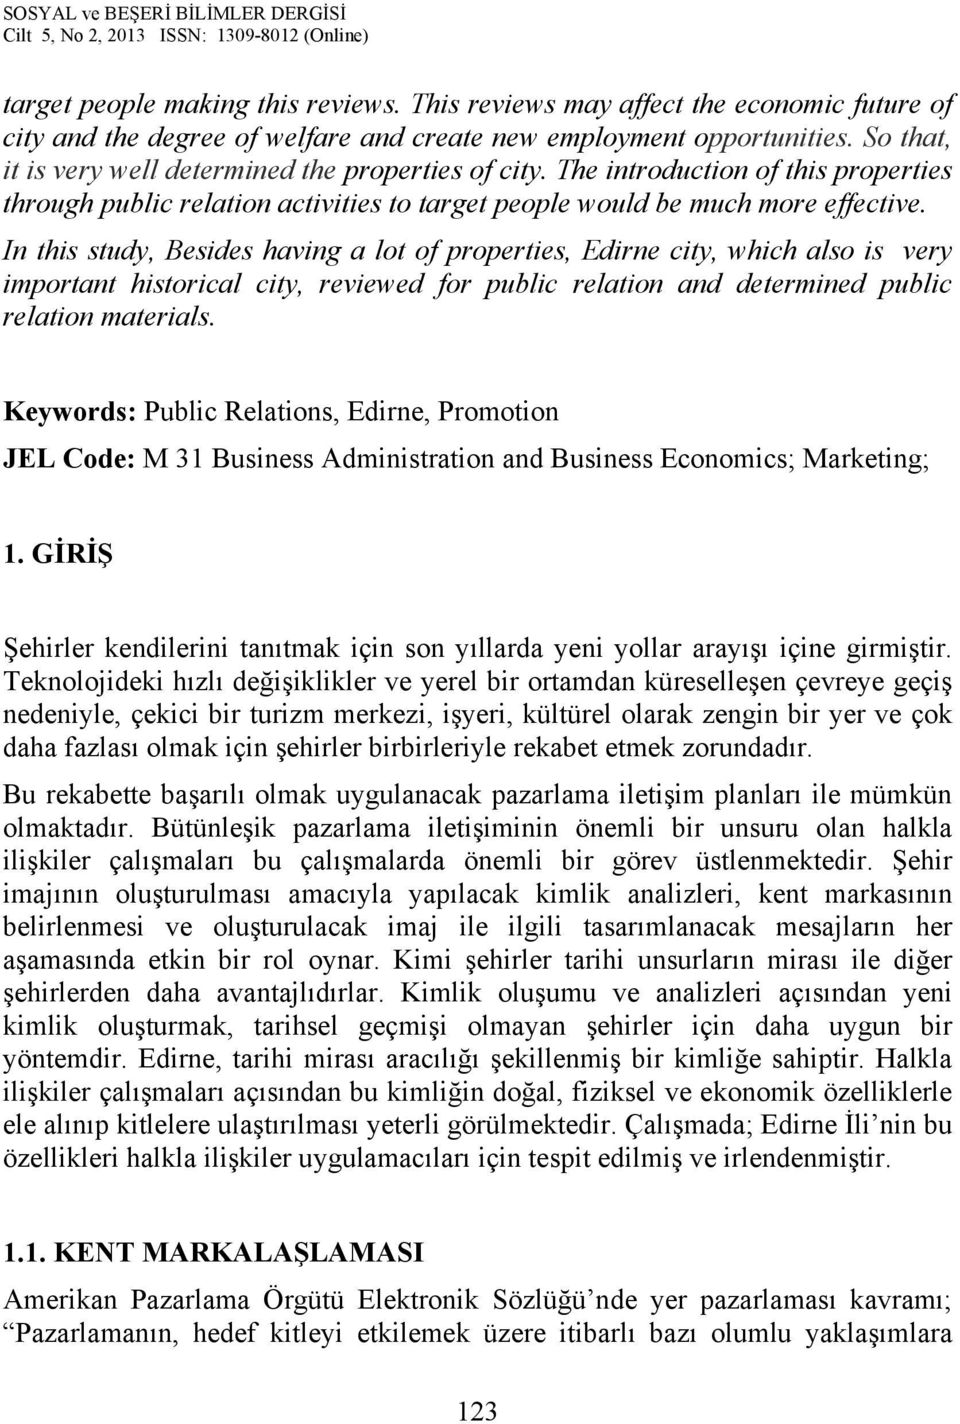 In this study, Besides having a lot of properties, Edirne city, which also is very important historical city, reviewed for public relation and determined public relation materials.